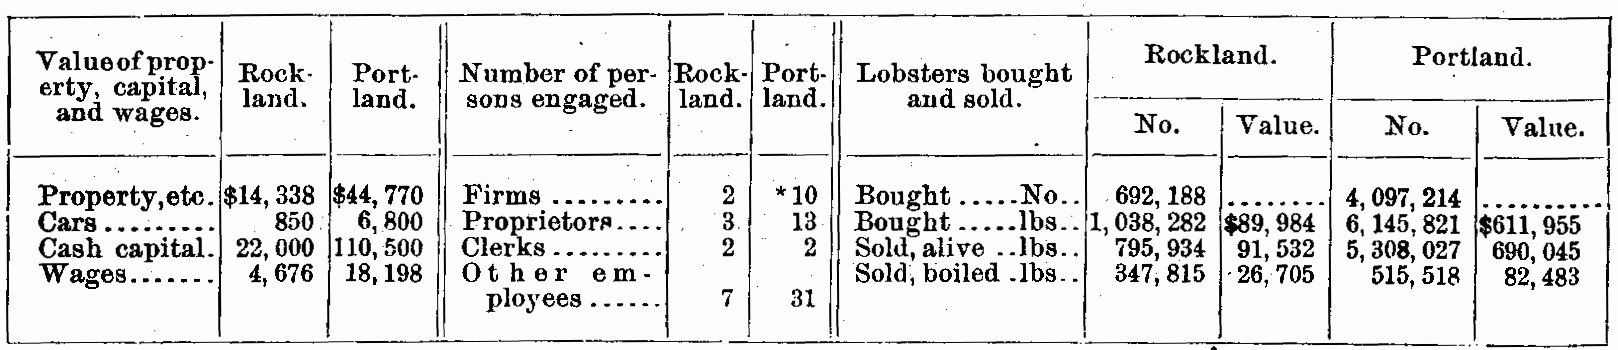 Extent of the wholesale lobster trade
of Rockland and Portland in 1898